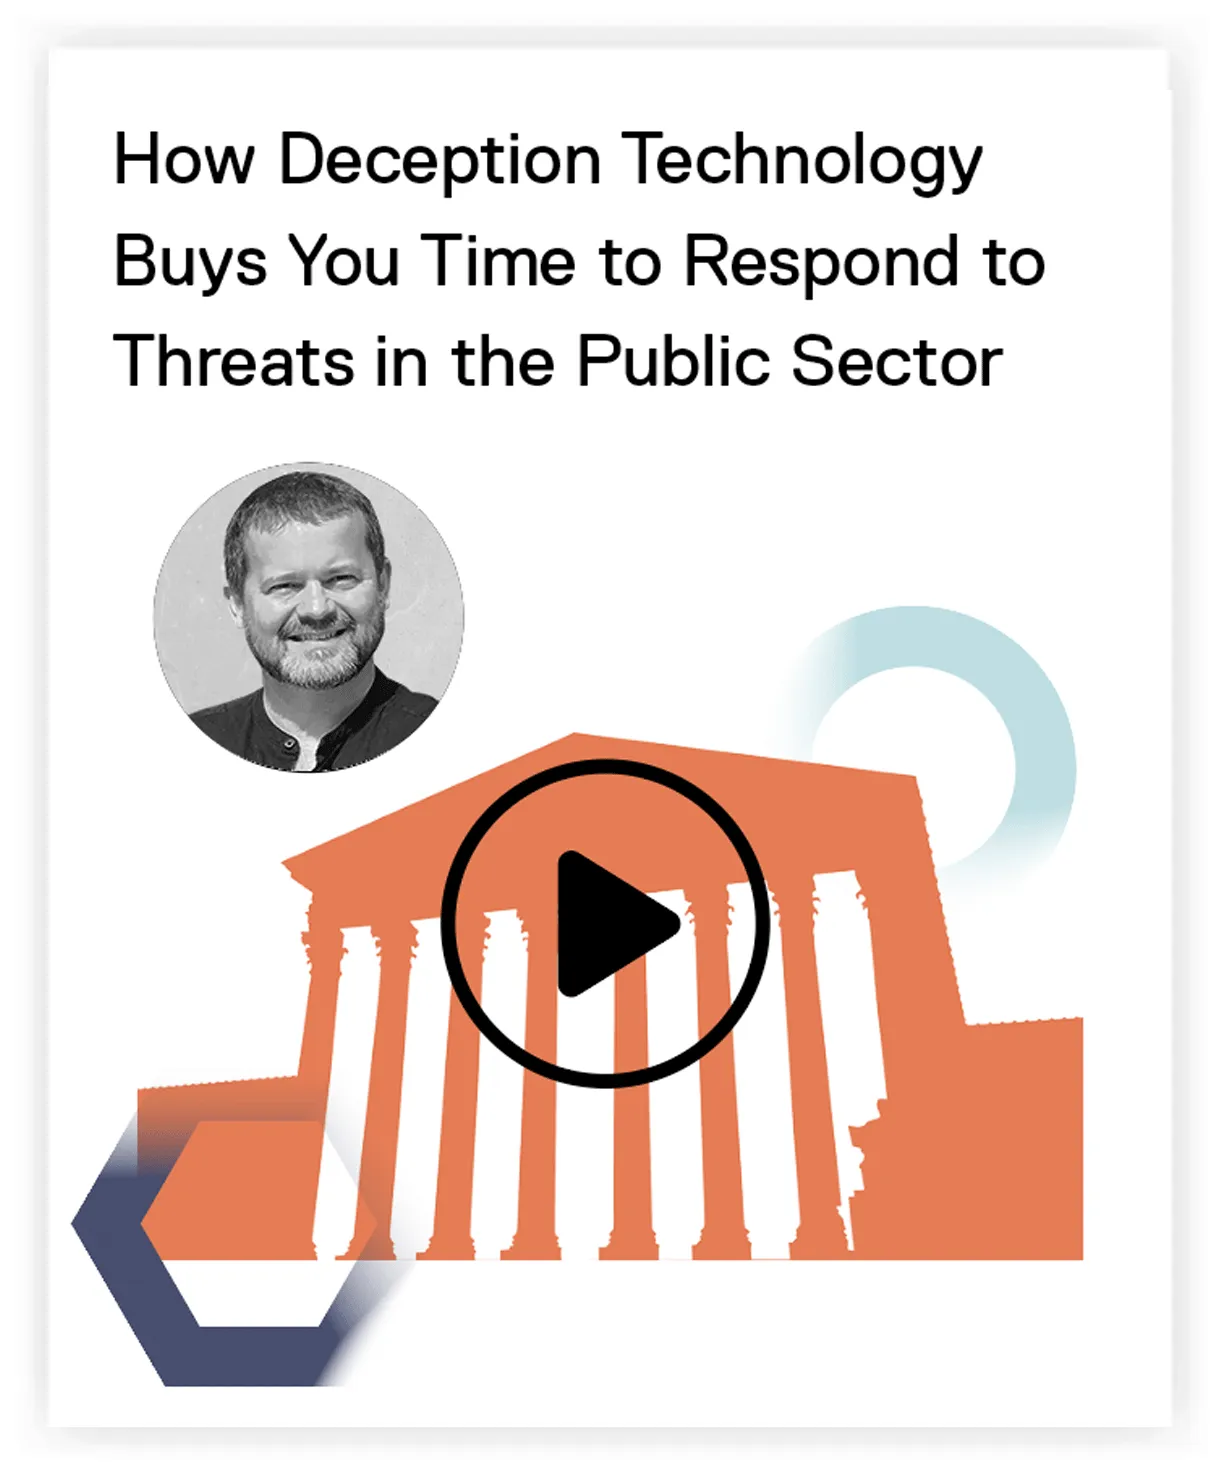 How deception technology buys you time to respond to threats in the public sector?